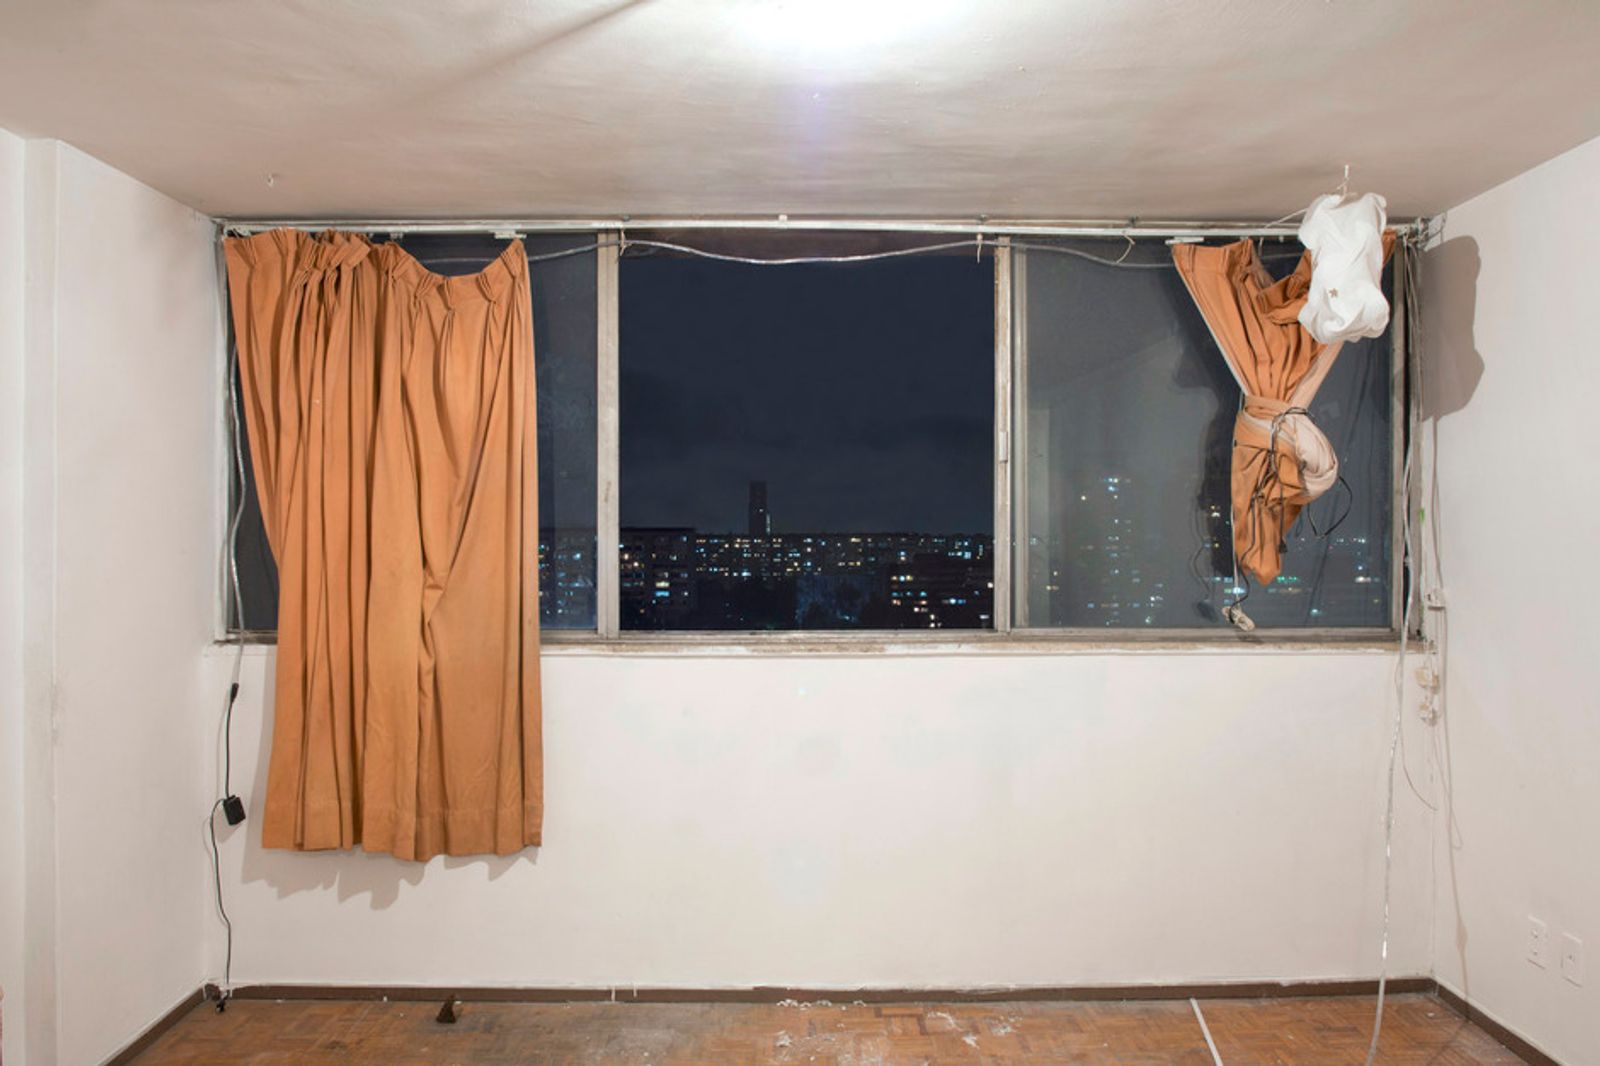 © Adam Wiseman - Image from the Windows of Tlatelolco photography project